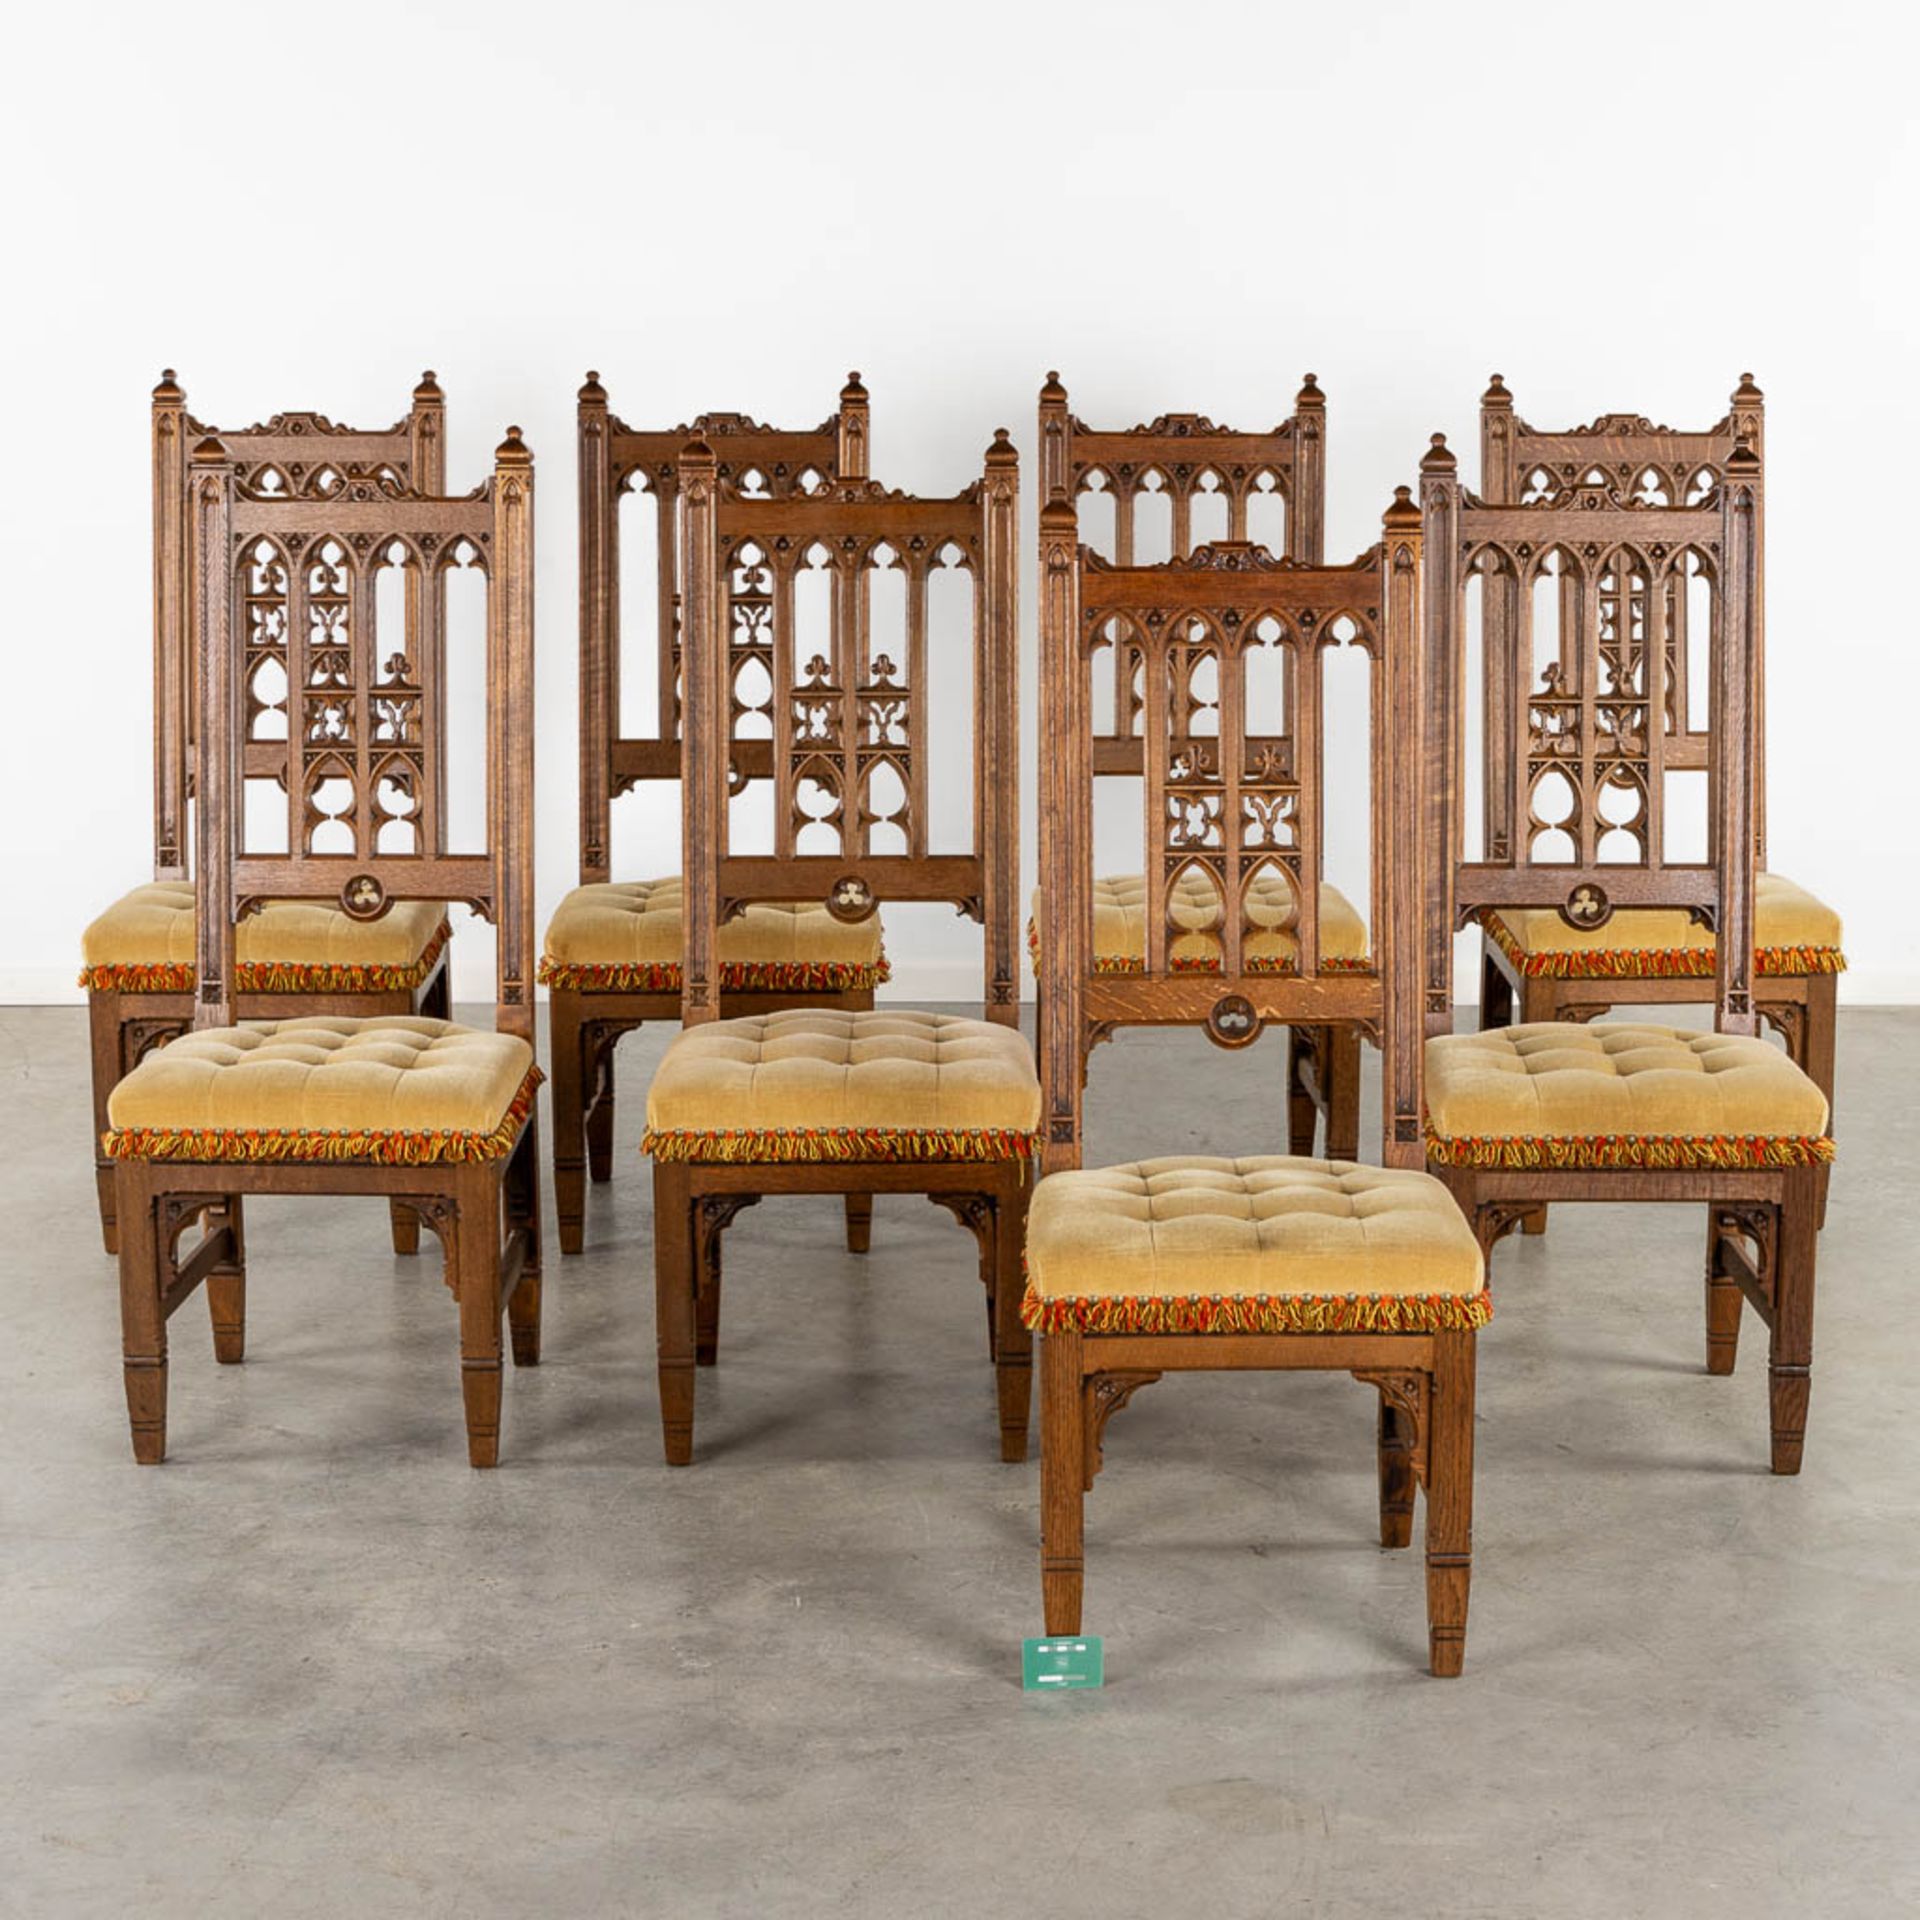 8 Gothic Revival style chairs, sculptured wood. Circa 1900. (L:54 x W:48 x H:123 cm) - Image 2 of 12